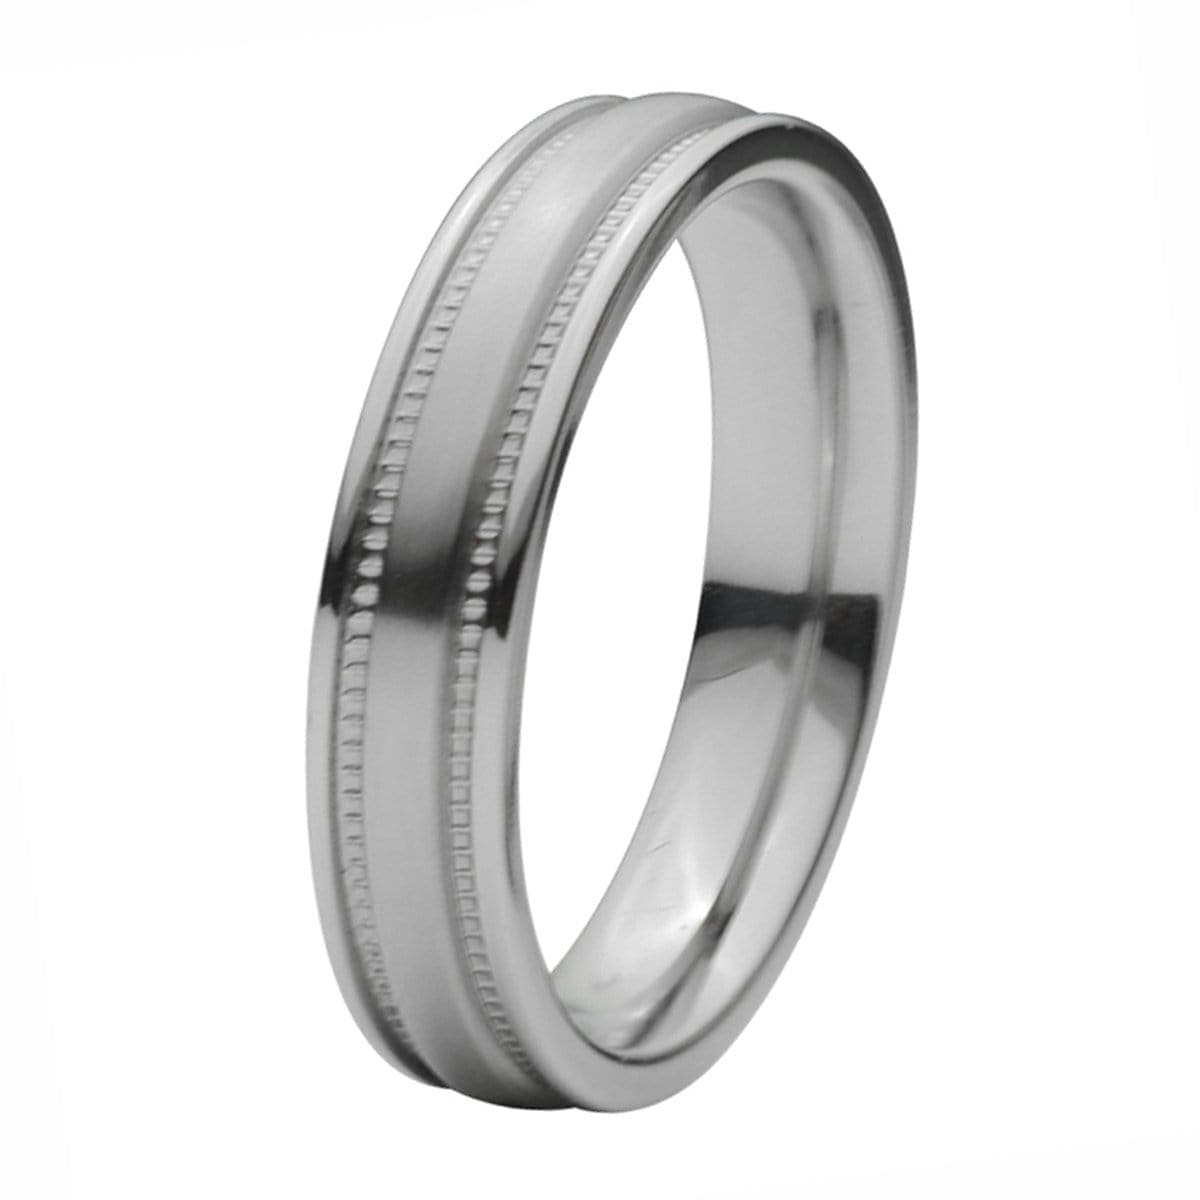 INOX JEWELRY Rings Silver Tone Titanium 5mm Fancy Groove Border Band Ring